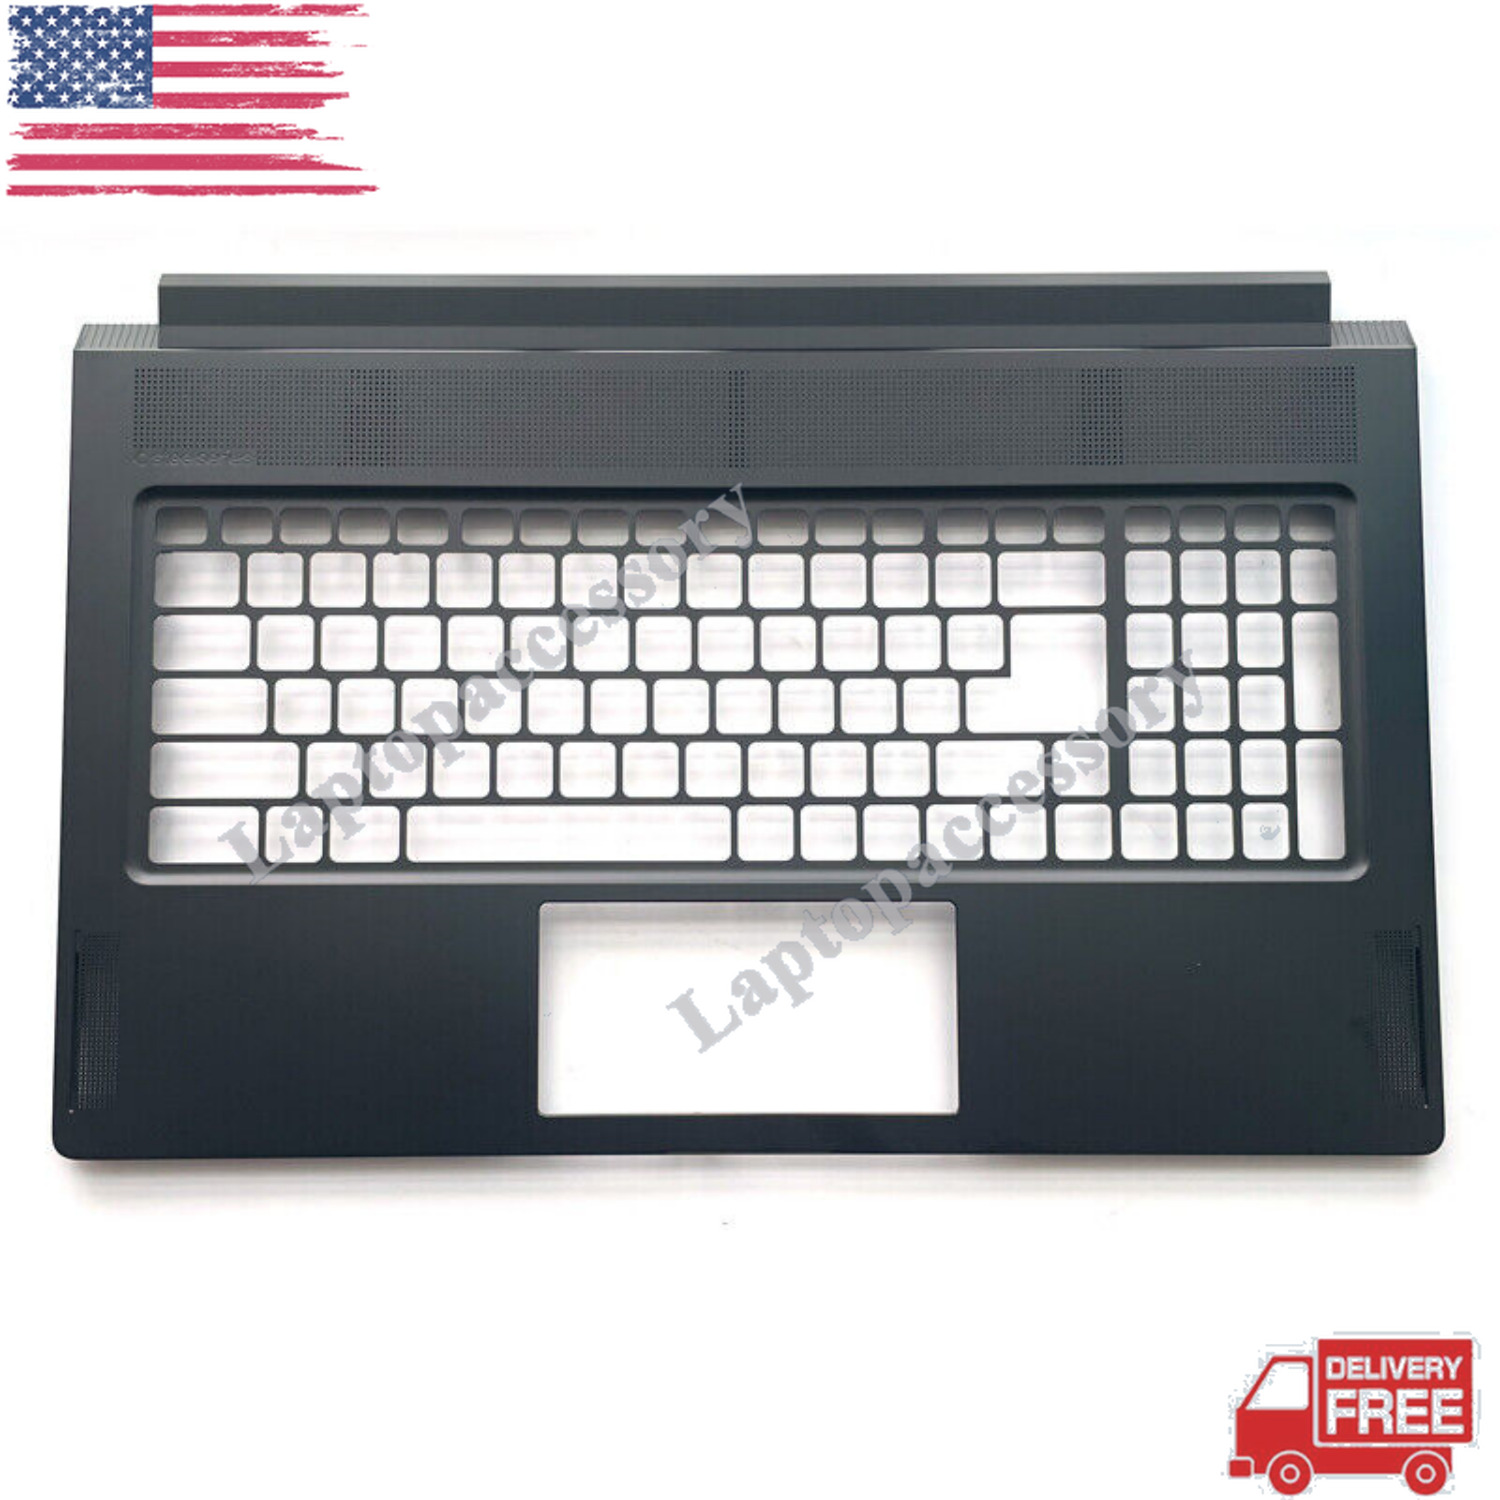 New For MSI GS76 Stealth 11UH 11UE MS-17M1 Laptop Palmrest Keyboard Cover 17.3in